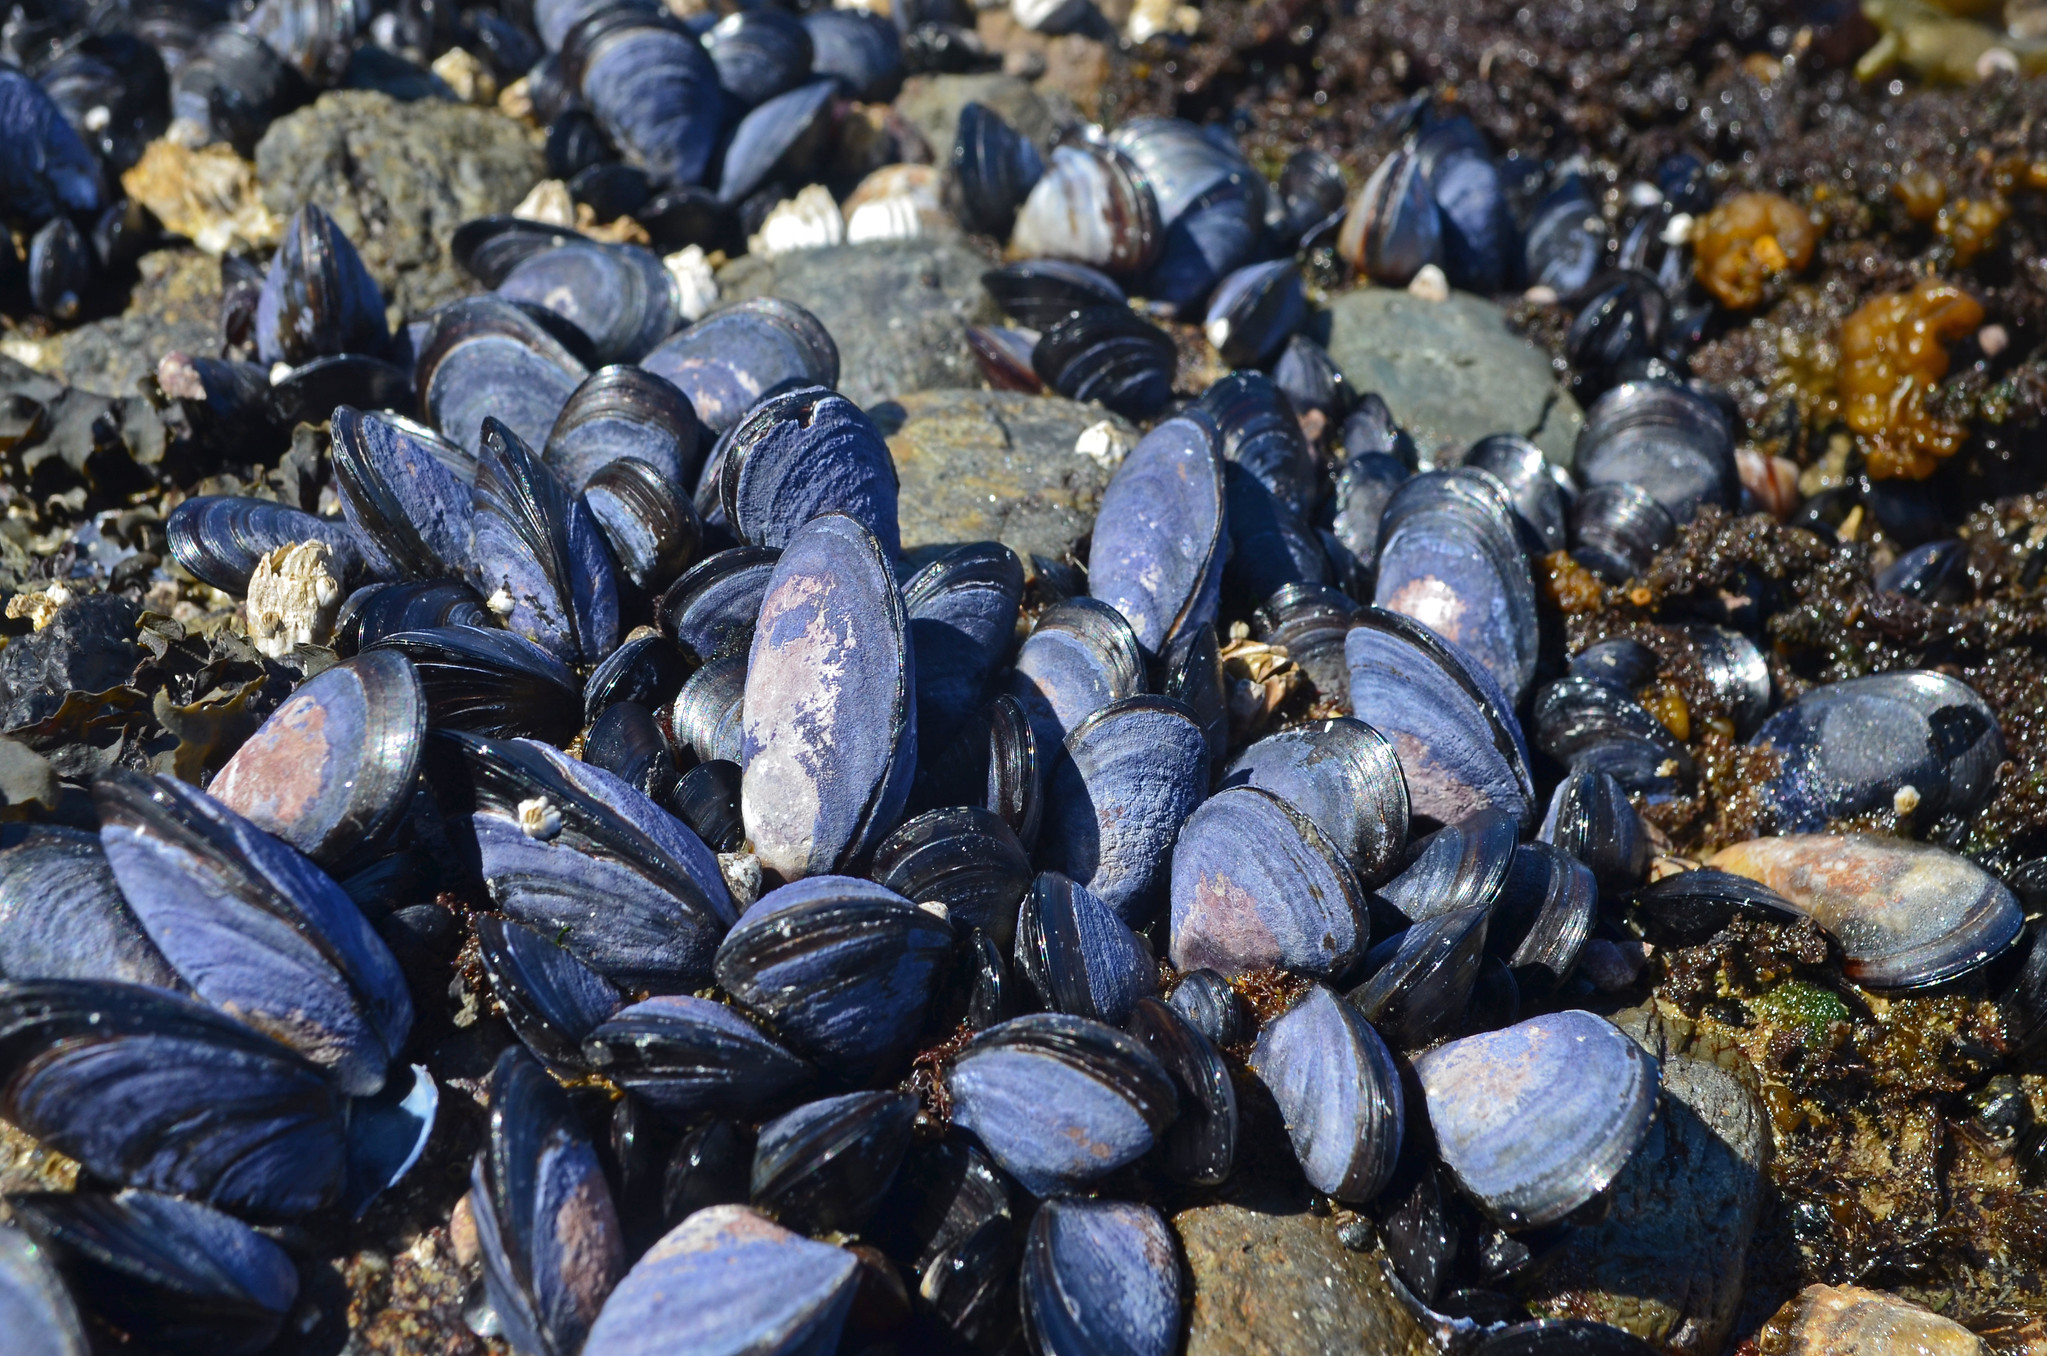 A cluster of mussels, attached to dark brown rocks. The mussels are a dark marine blue and behind them is a small pile of shiny brown kelp.